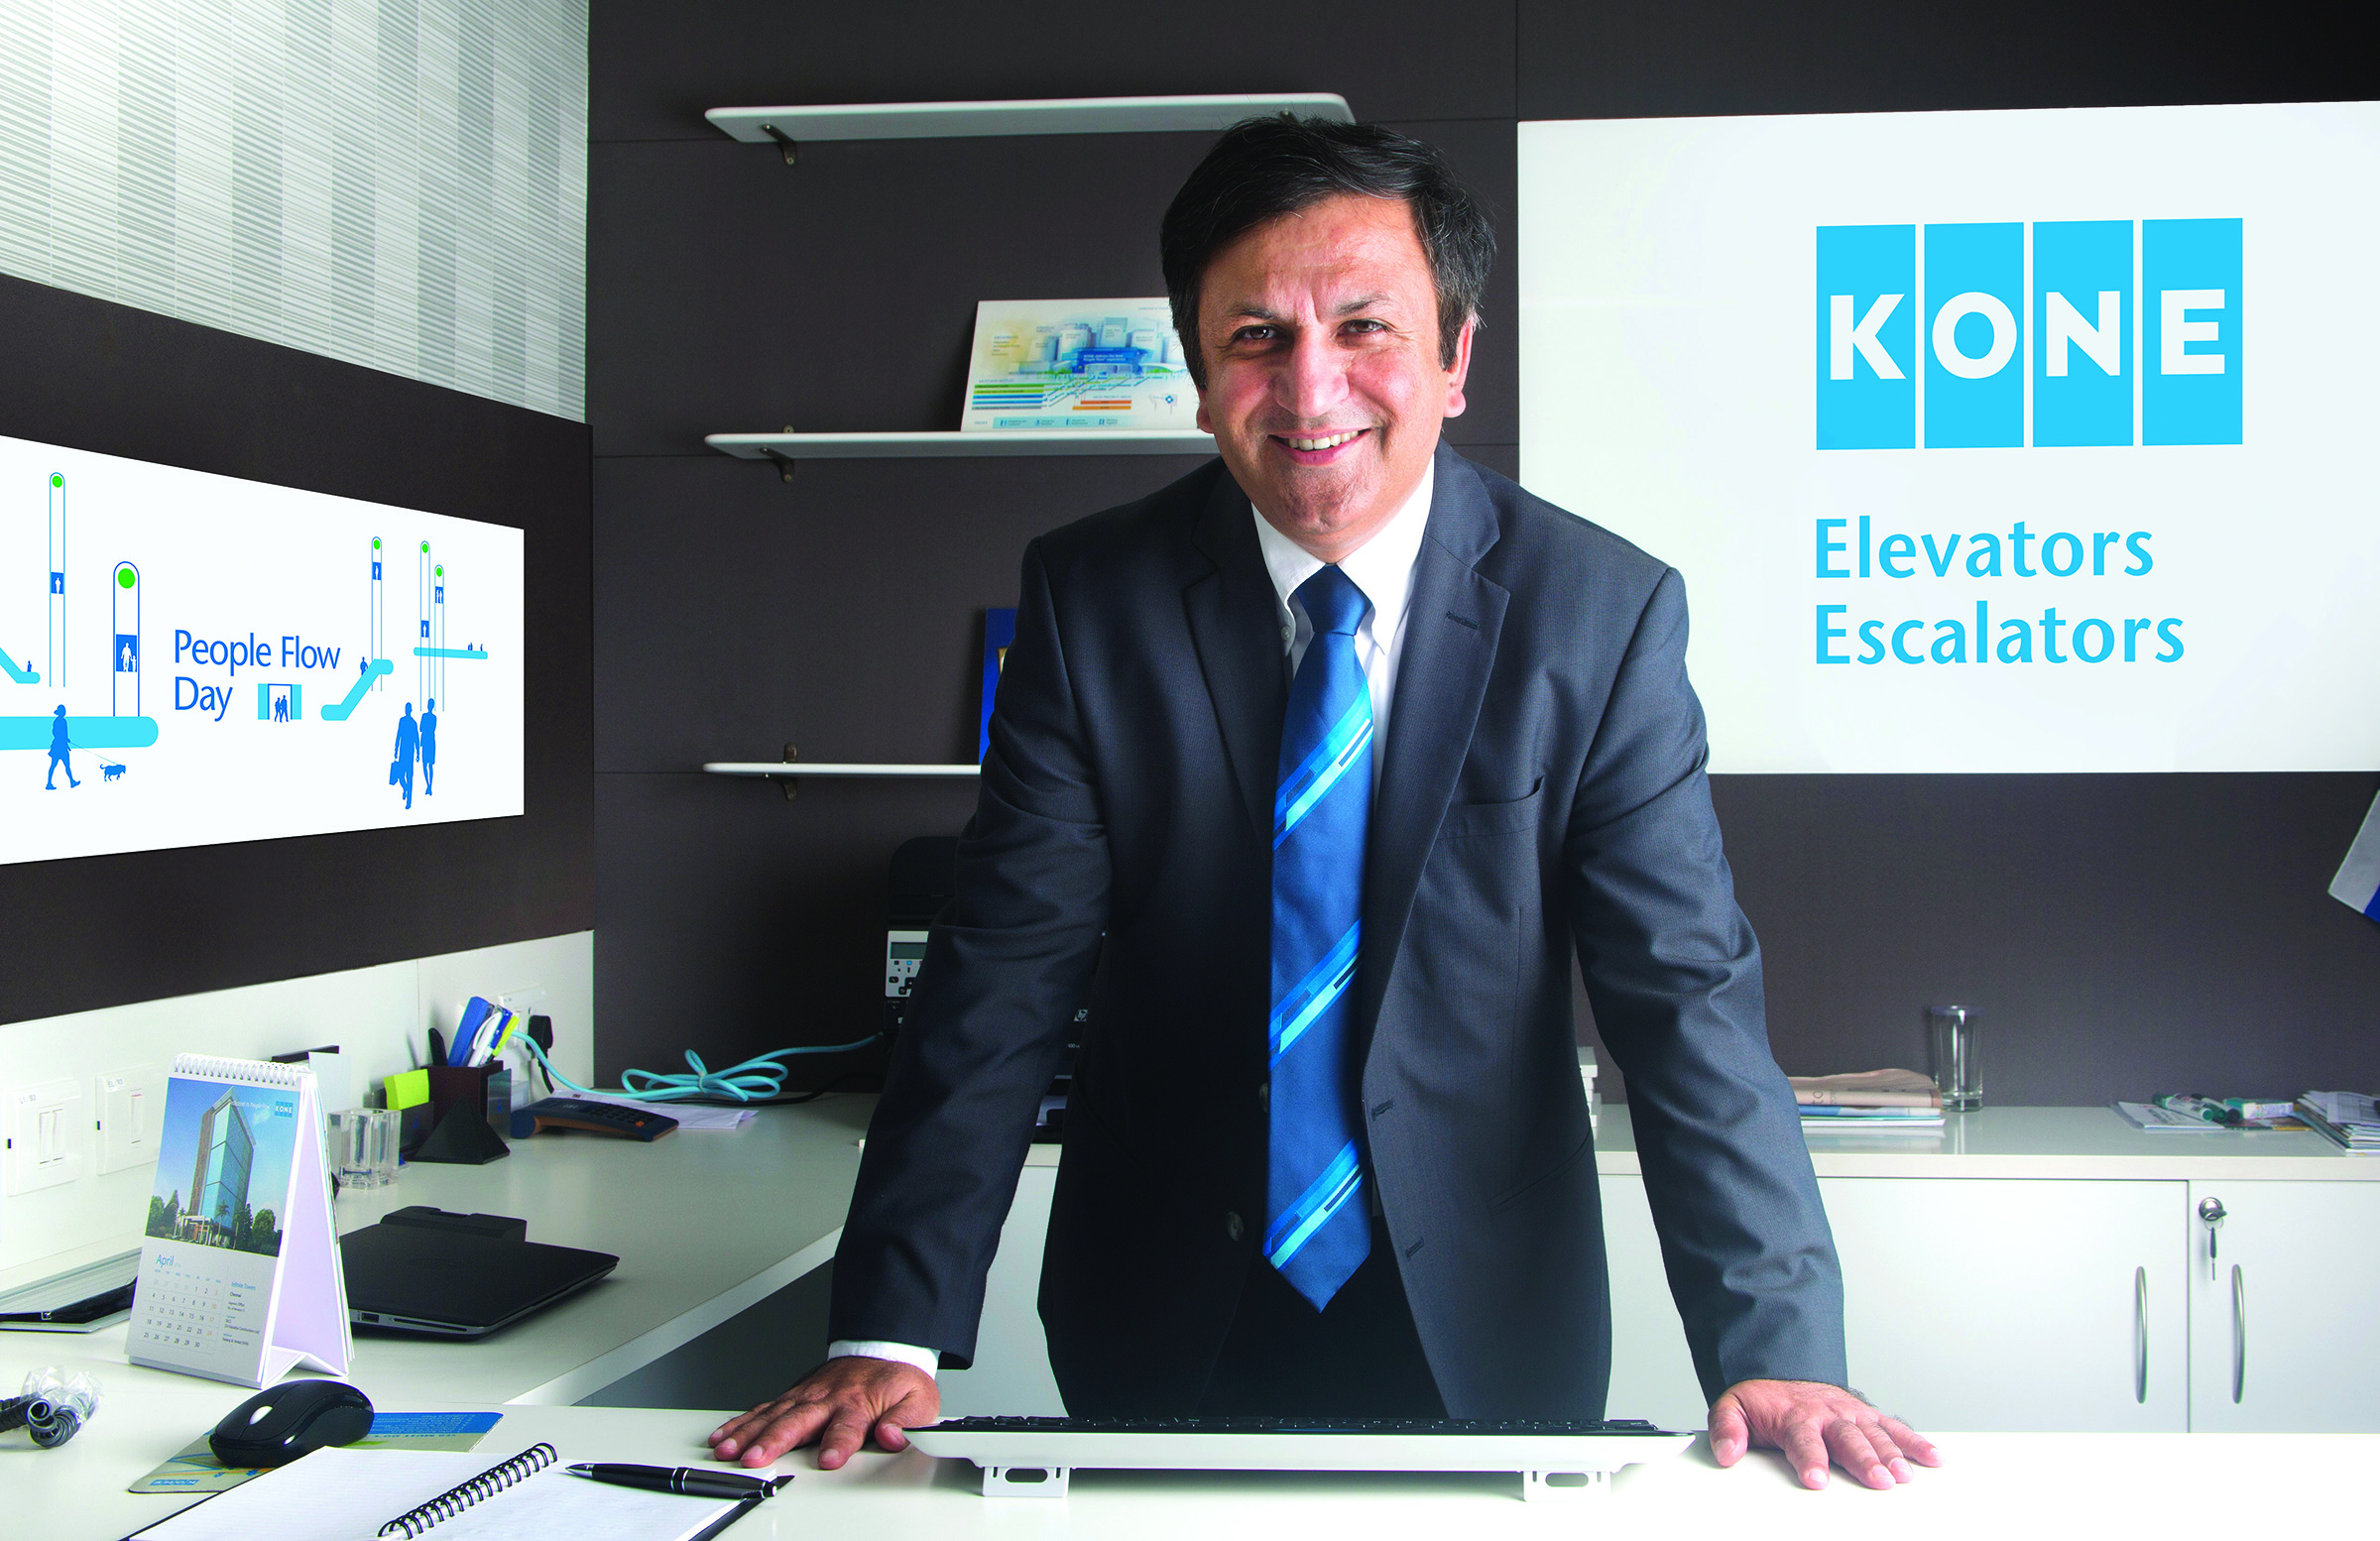 Requirement for elevators is likely to be quite high - AMIT GOSSAIN, Managing Director, KONE Elevator India